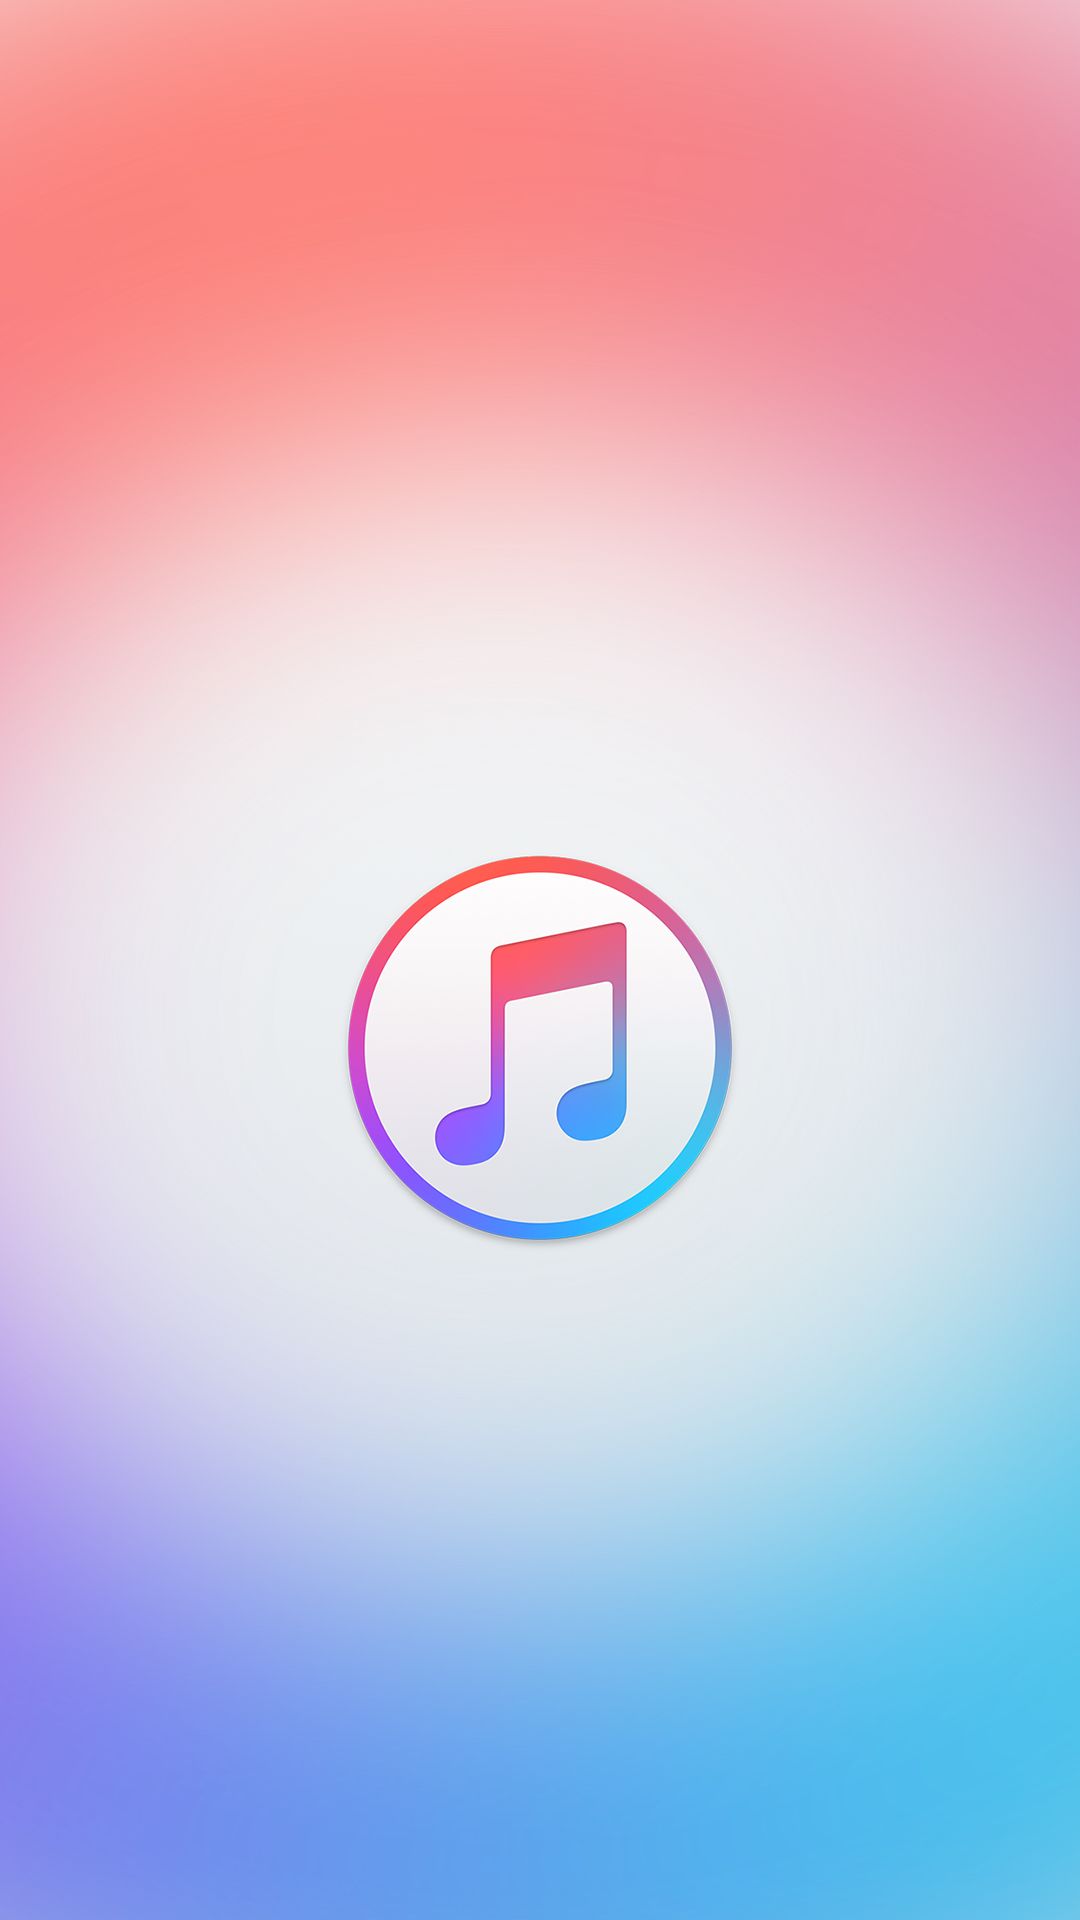 Apple Music wallpapers for iPhone, iPad, and desktop